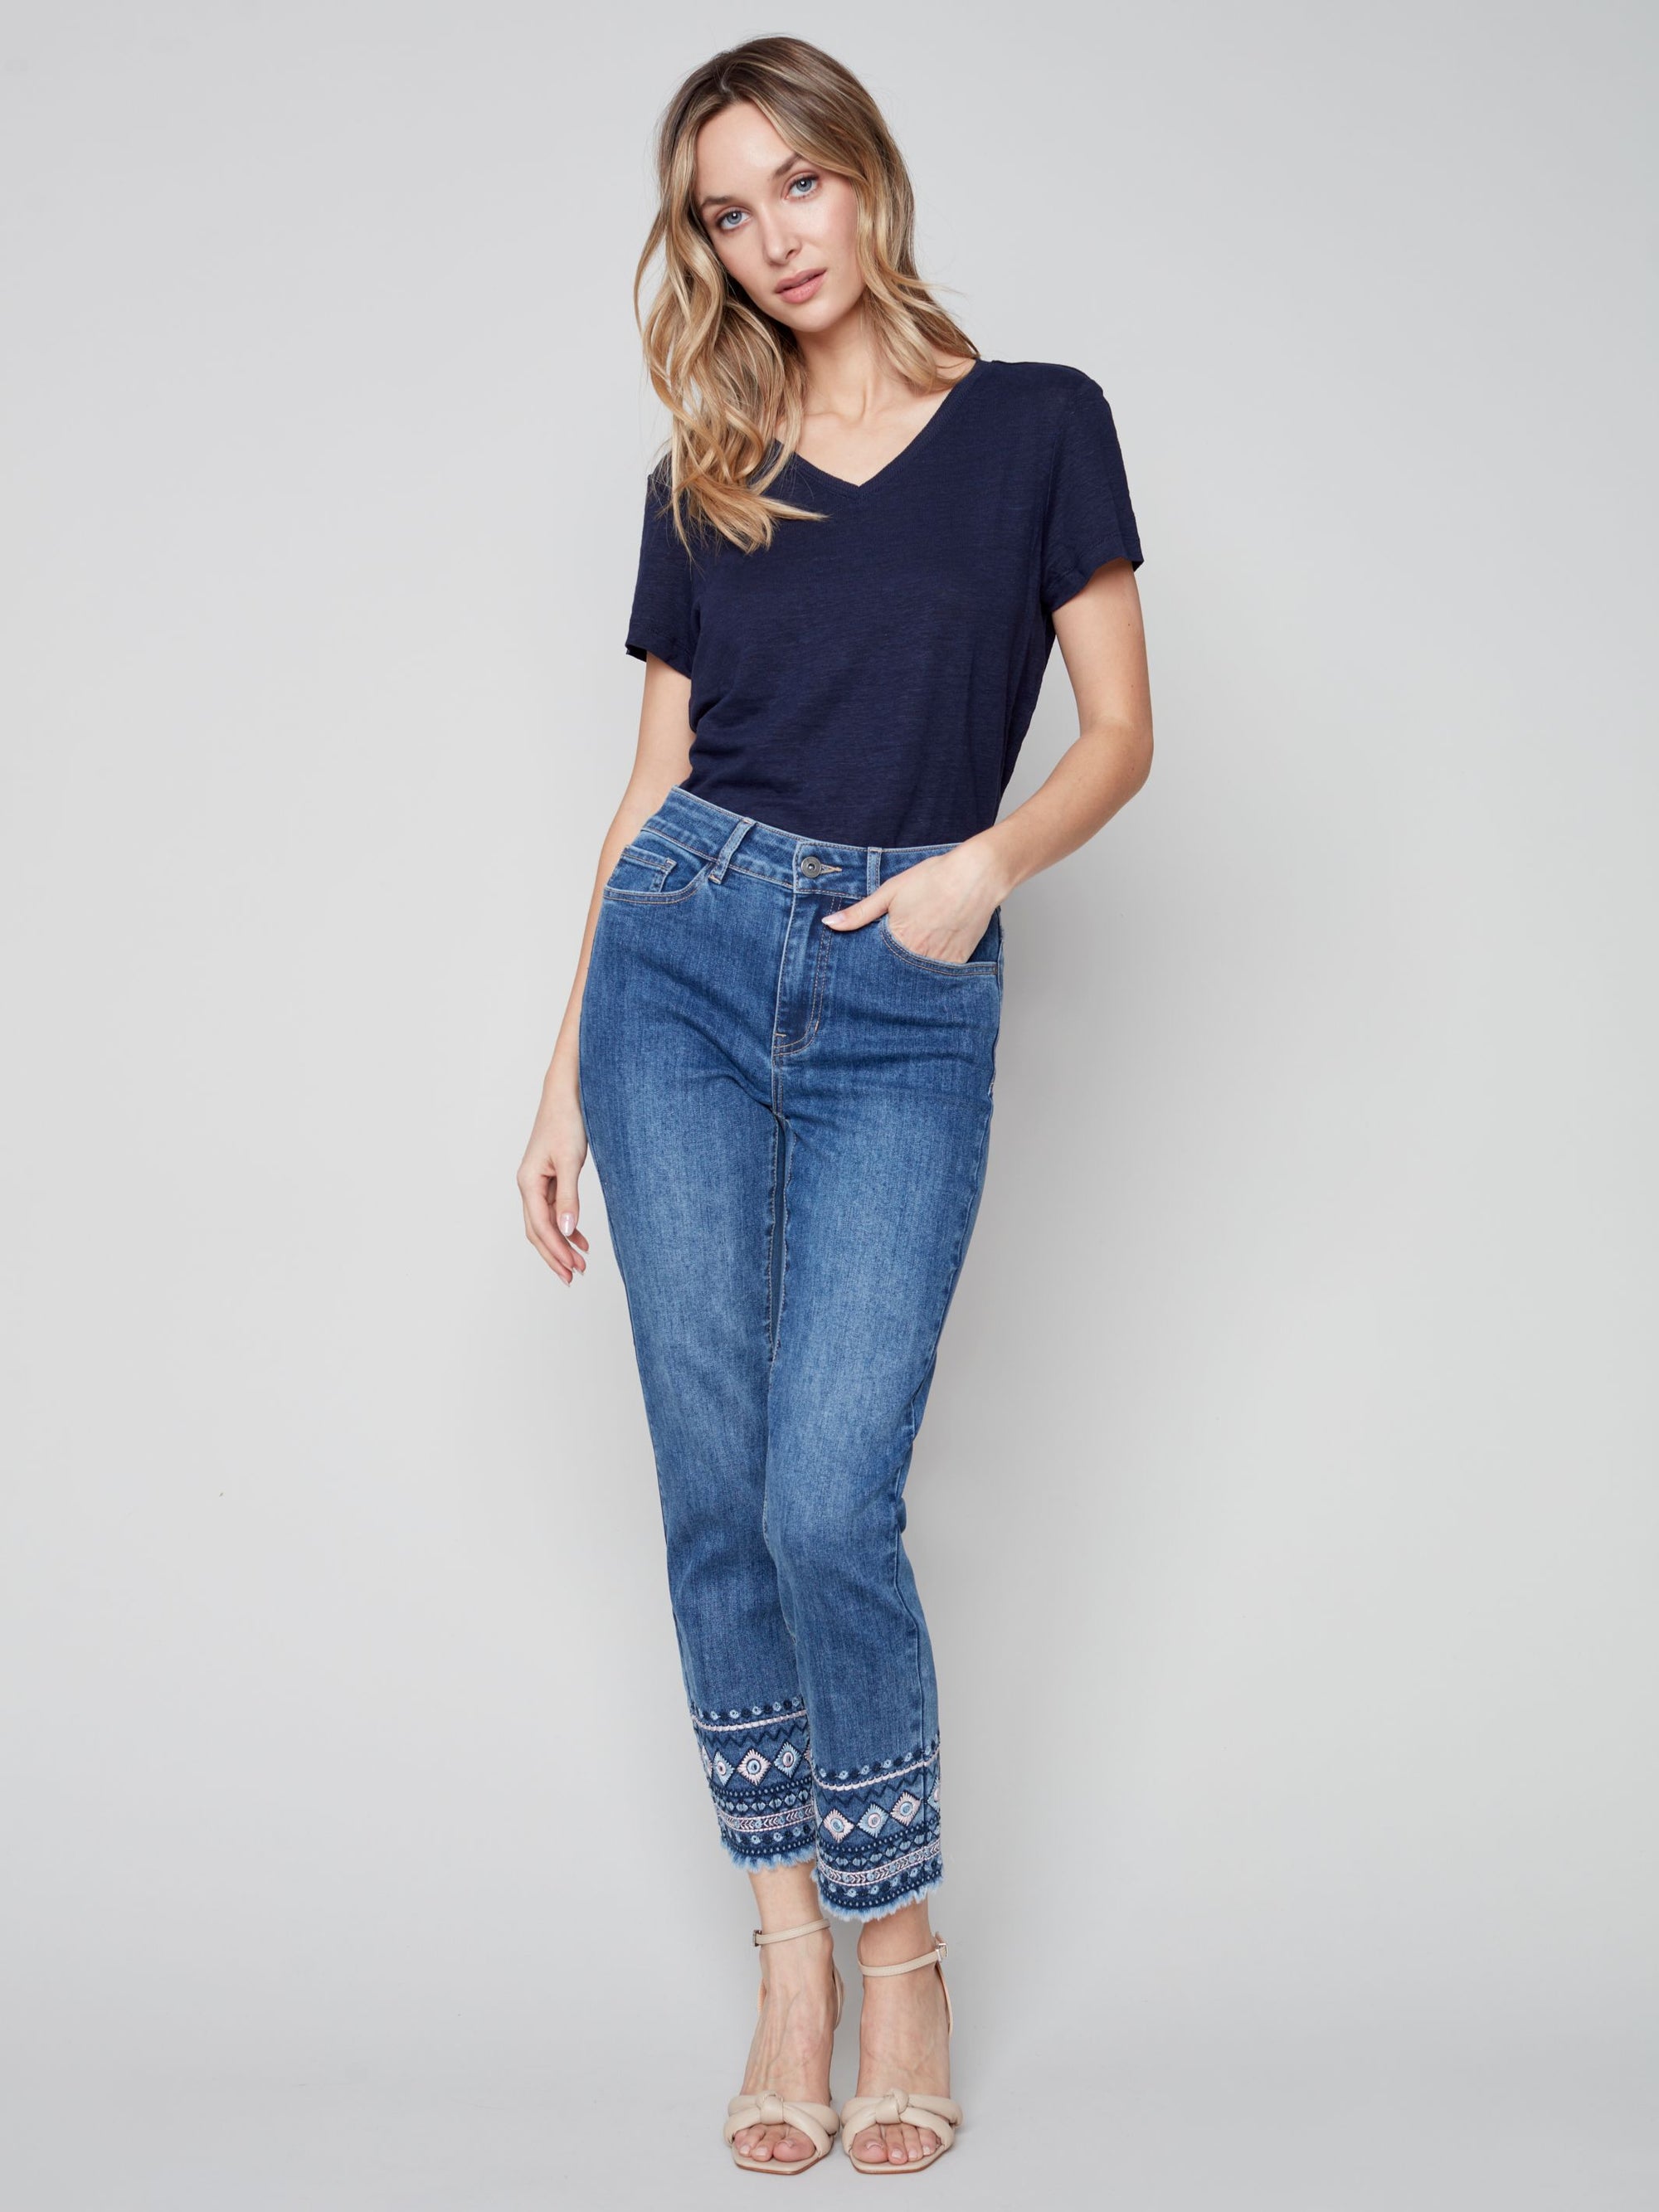 Charlie B Embroidered Cuff Pant